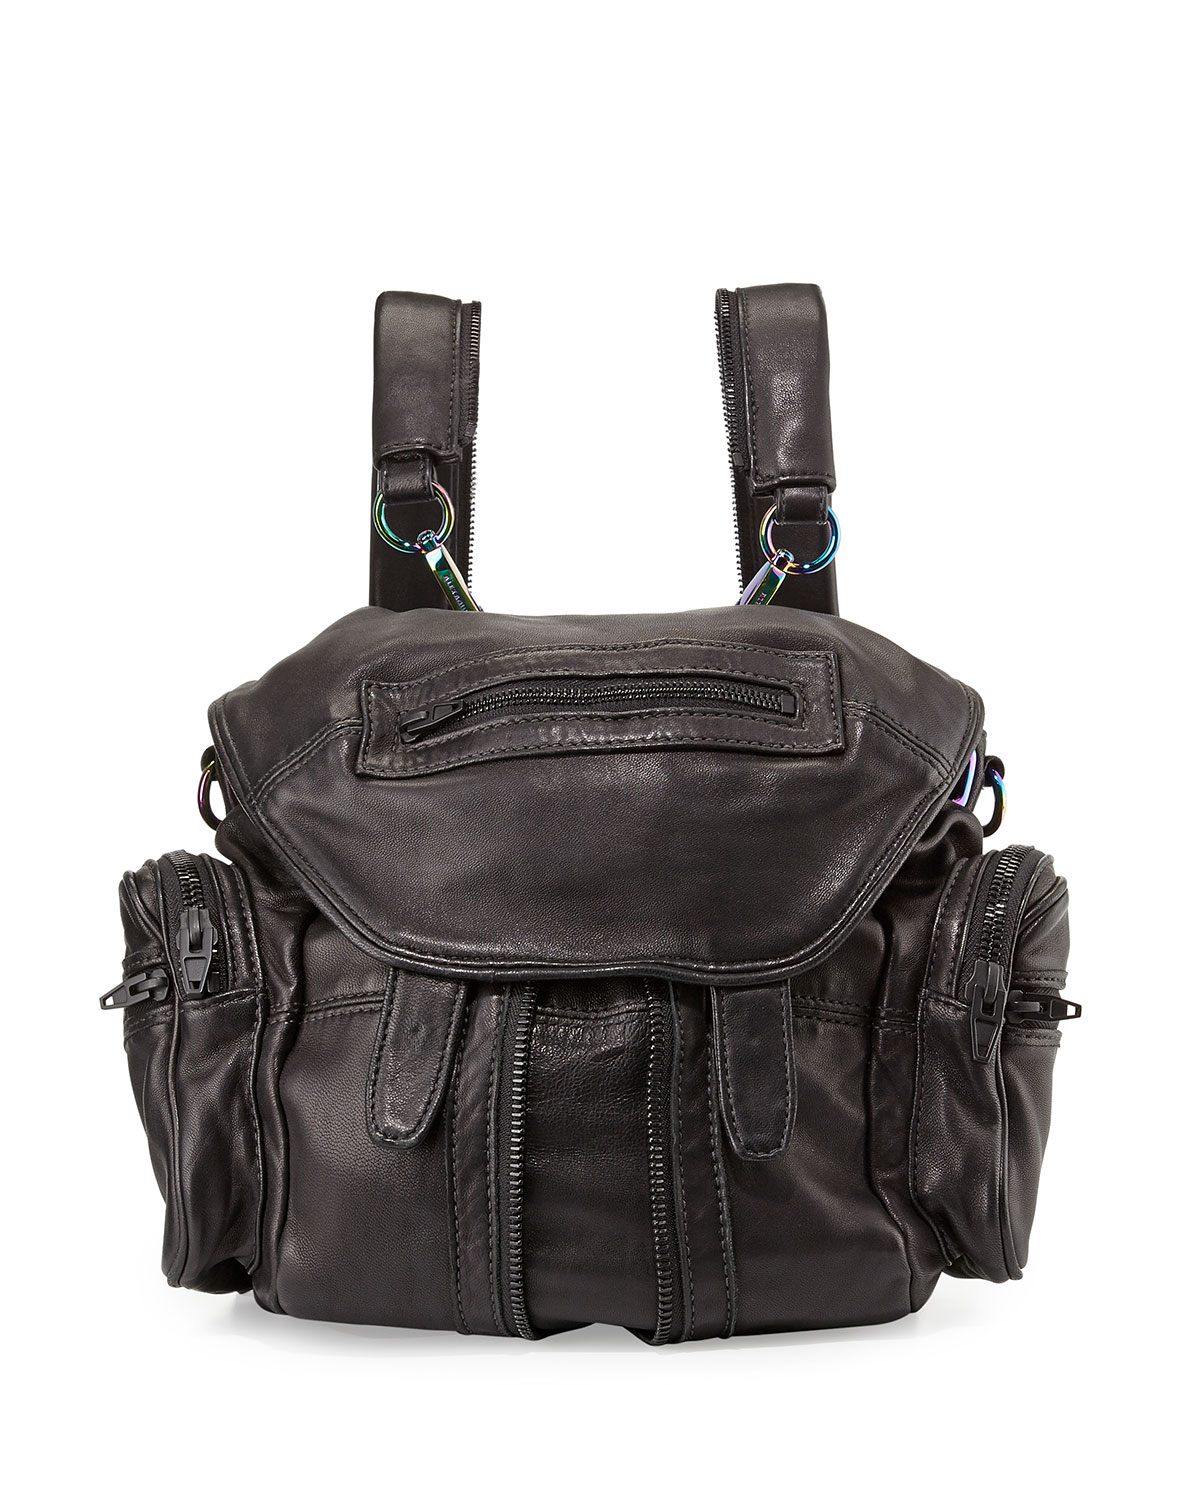 Alexander wang Mini Marti Washed Leather Backpack in Black | Lyst